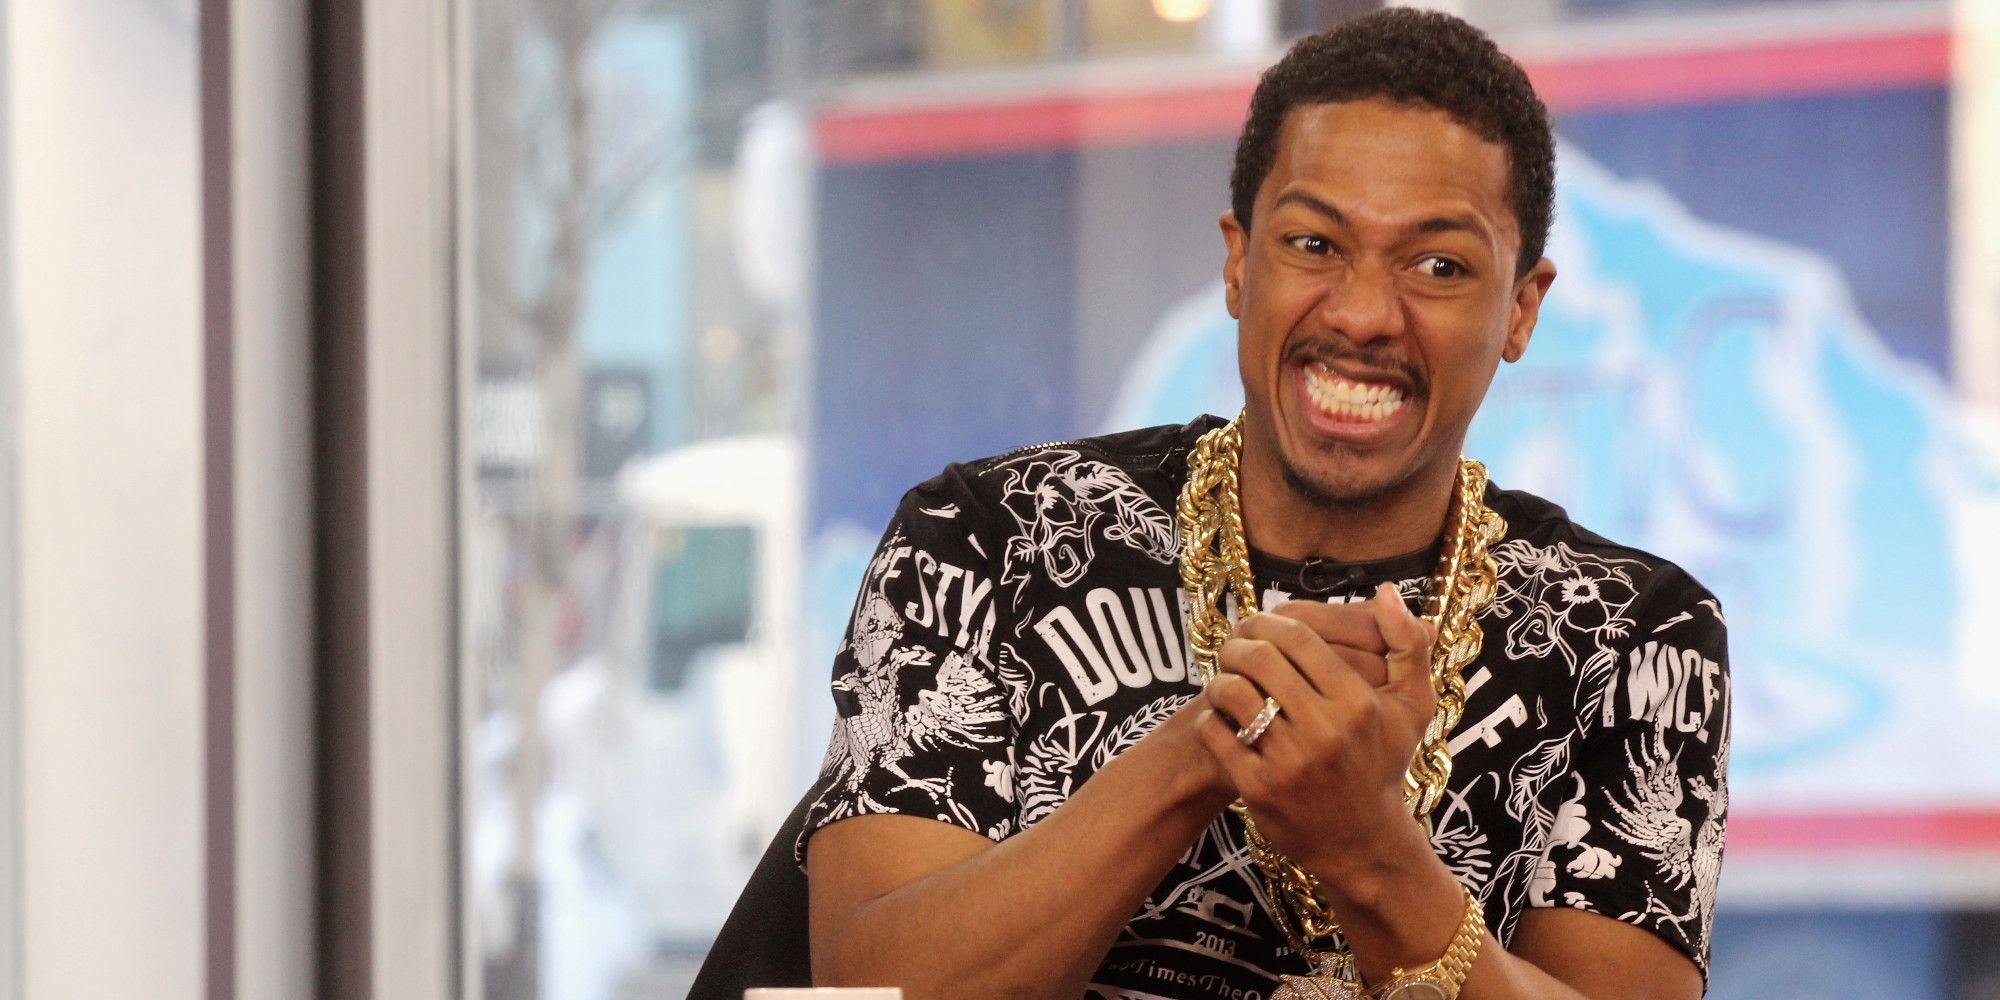 Pictures of Nick Cannon.